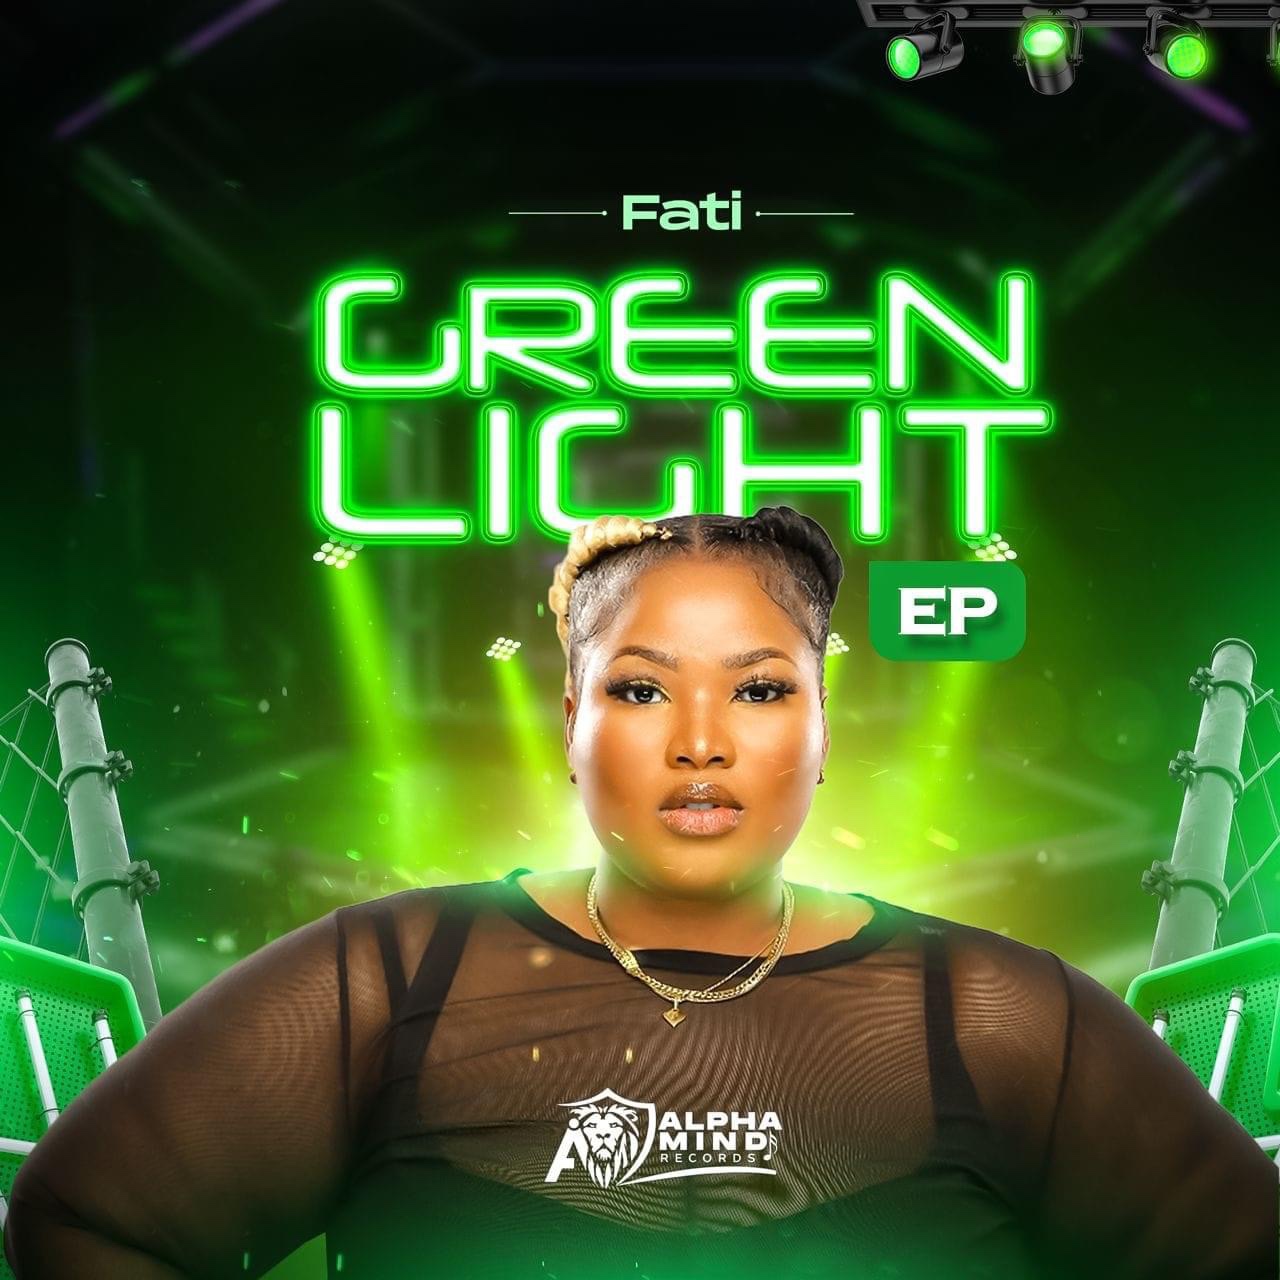 Fati unveils artwork, track list for debut EP, “Green Light”